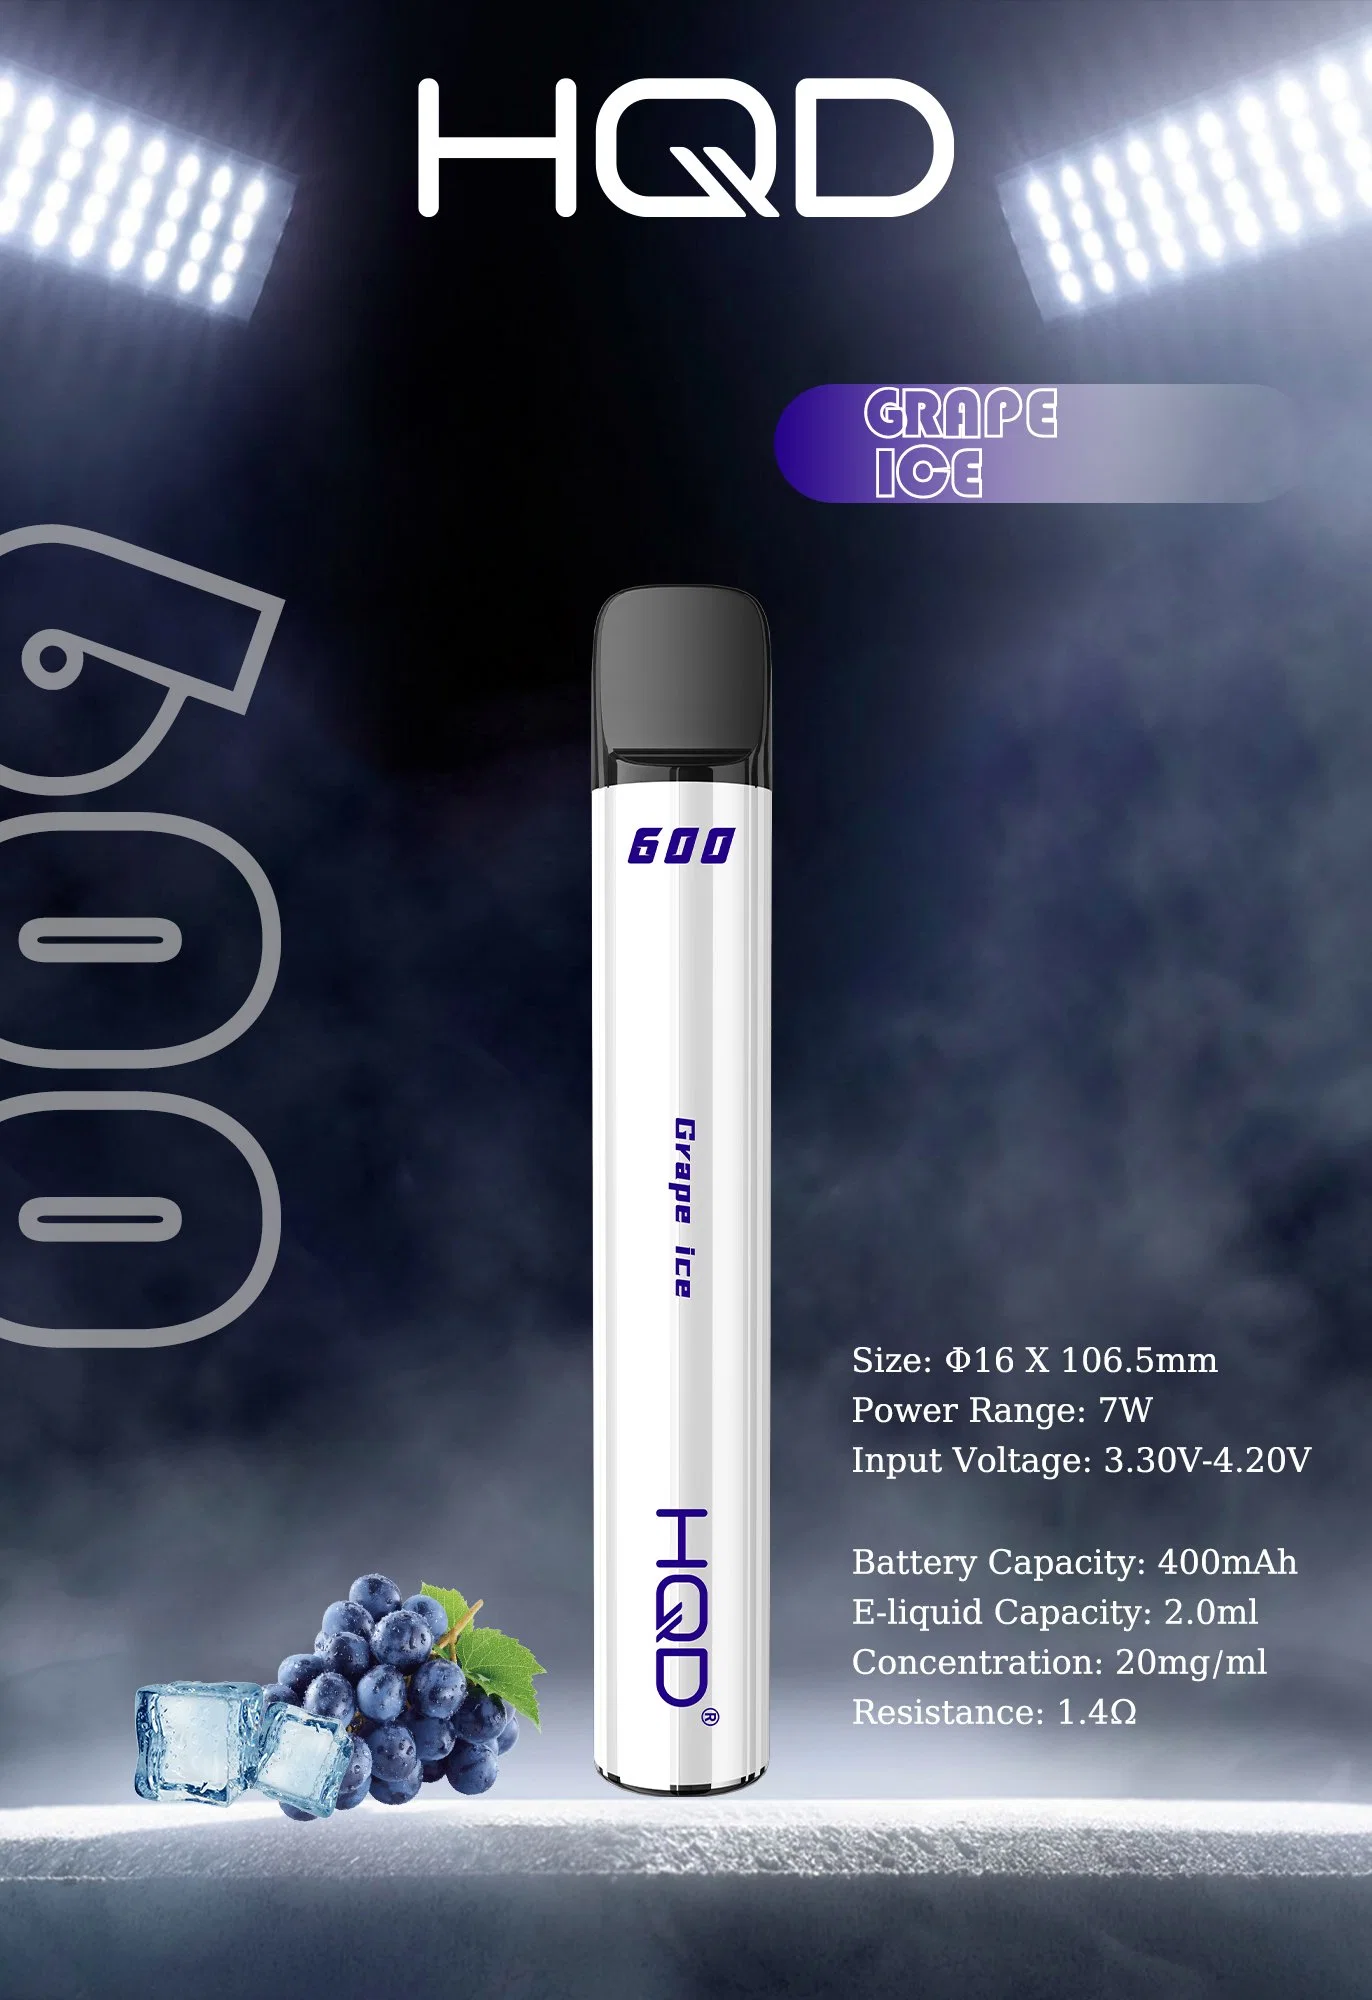 China Products/Suppliers. Wholesale/Supplier Disposable/Chargeable Vape Premium Quality 600 Puffs Electronic Cigarette Mesh Coil Disposable/Chargeable Ecig Hqd H600